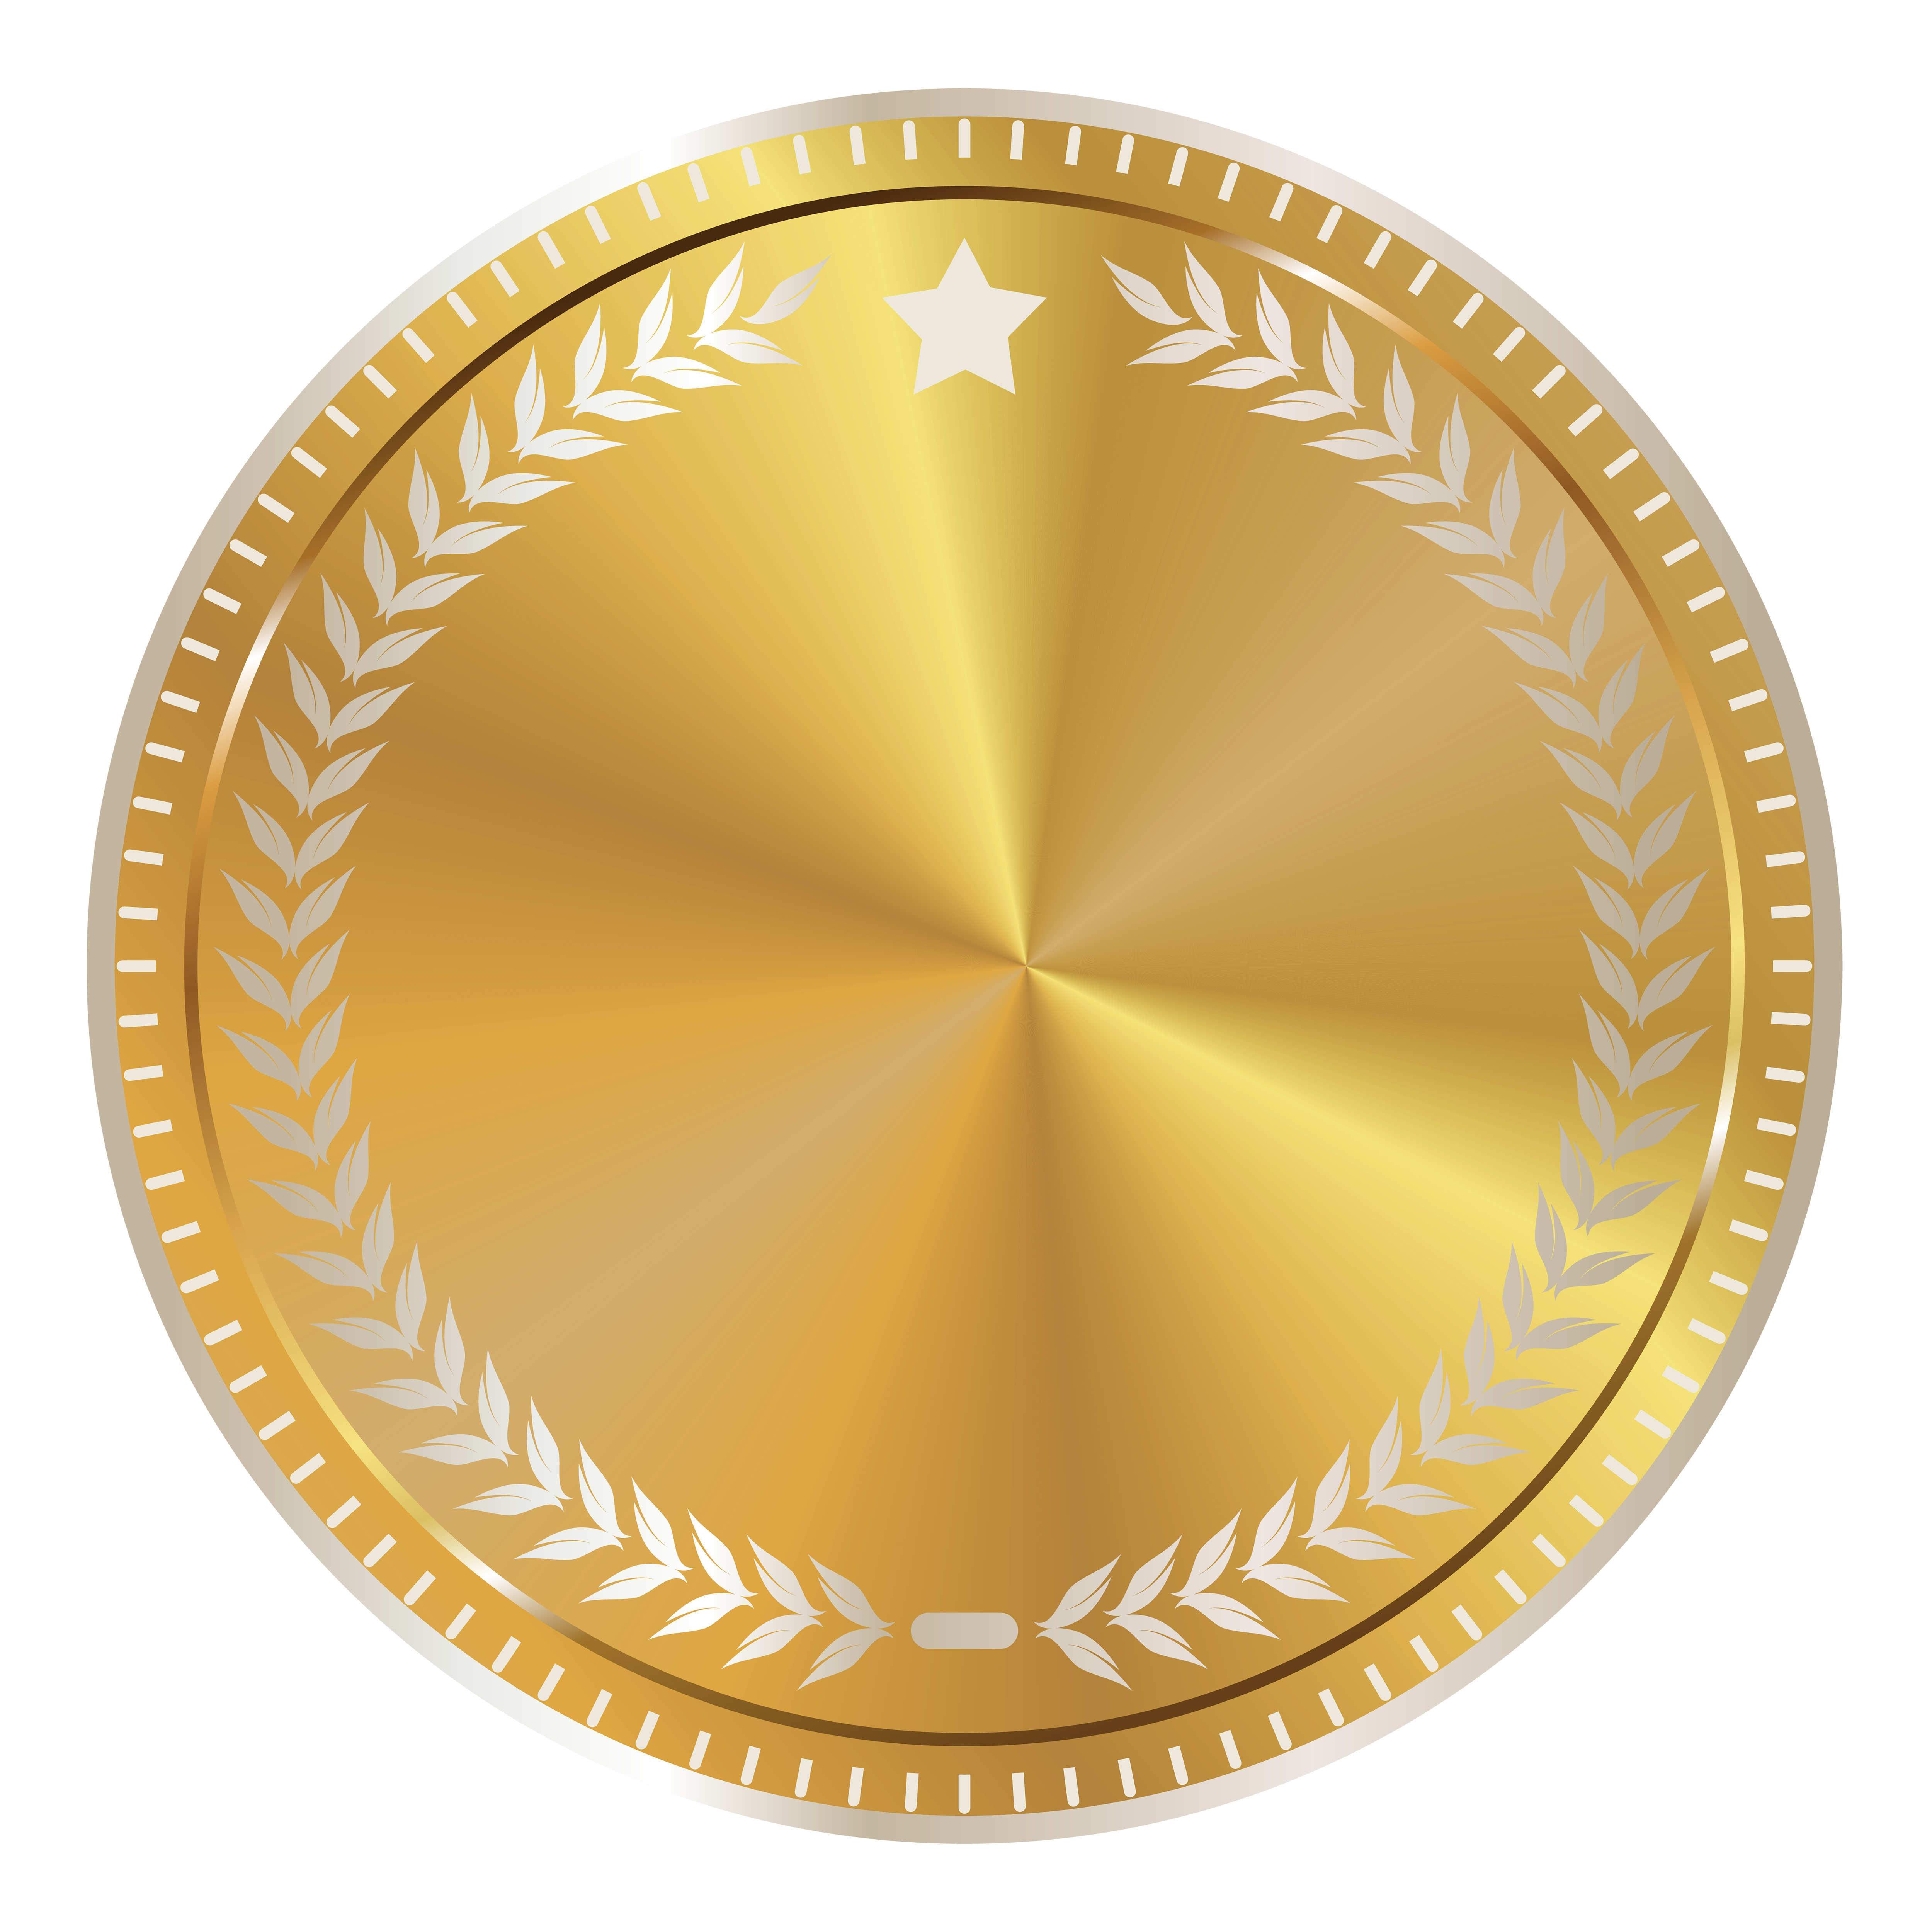 Seal with decoration png. Badge clipart gold